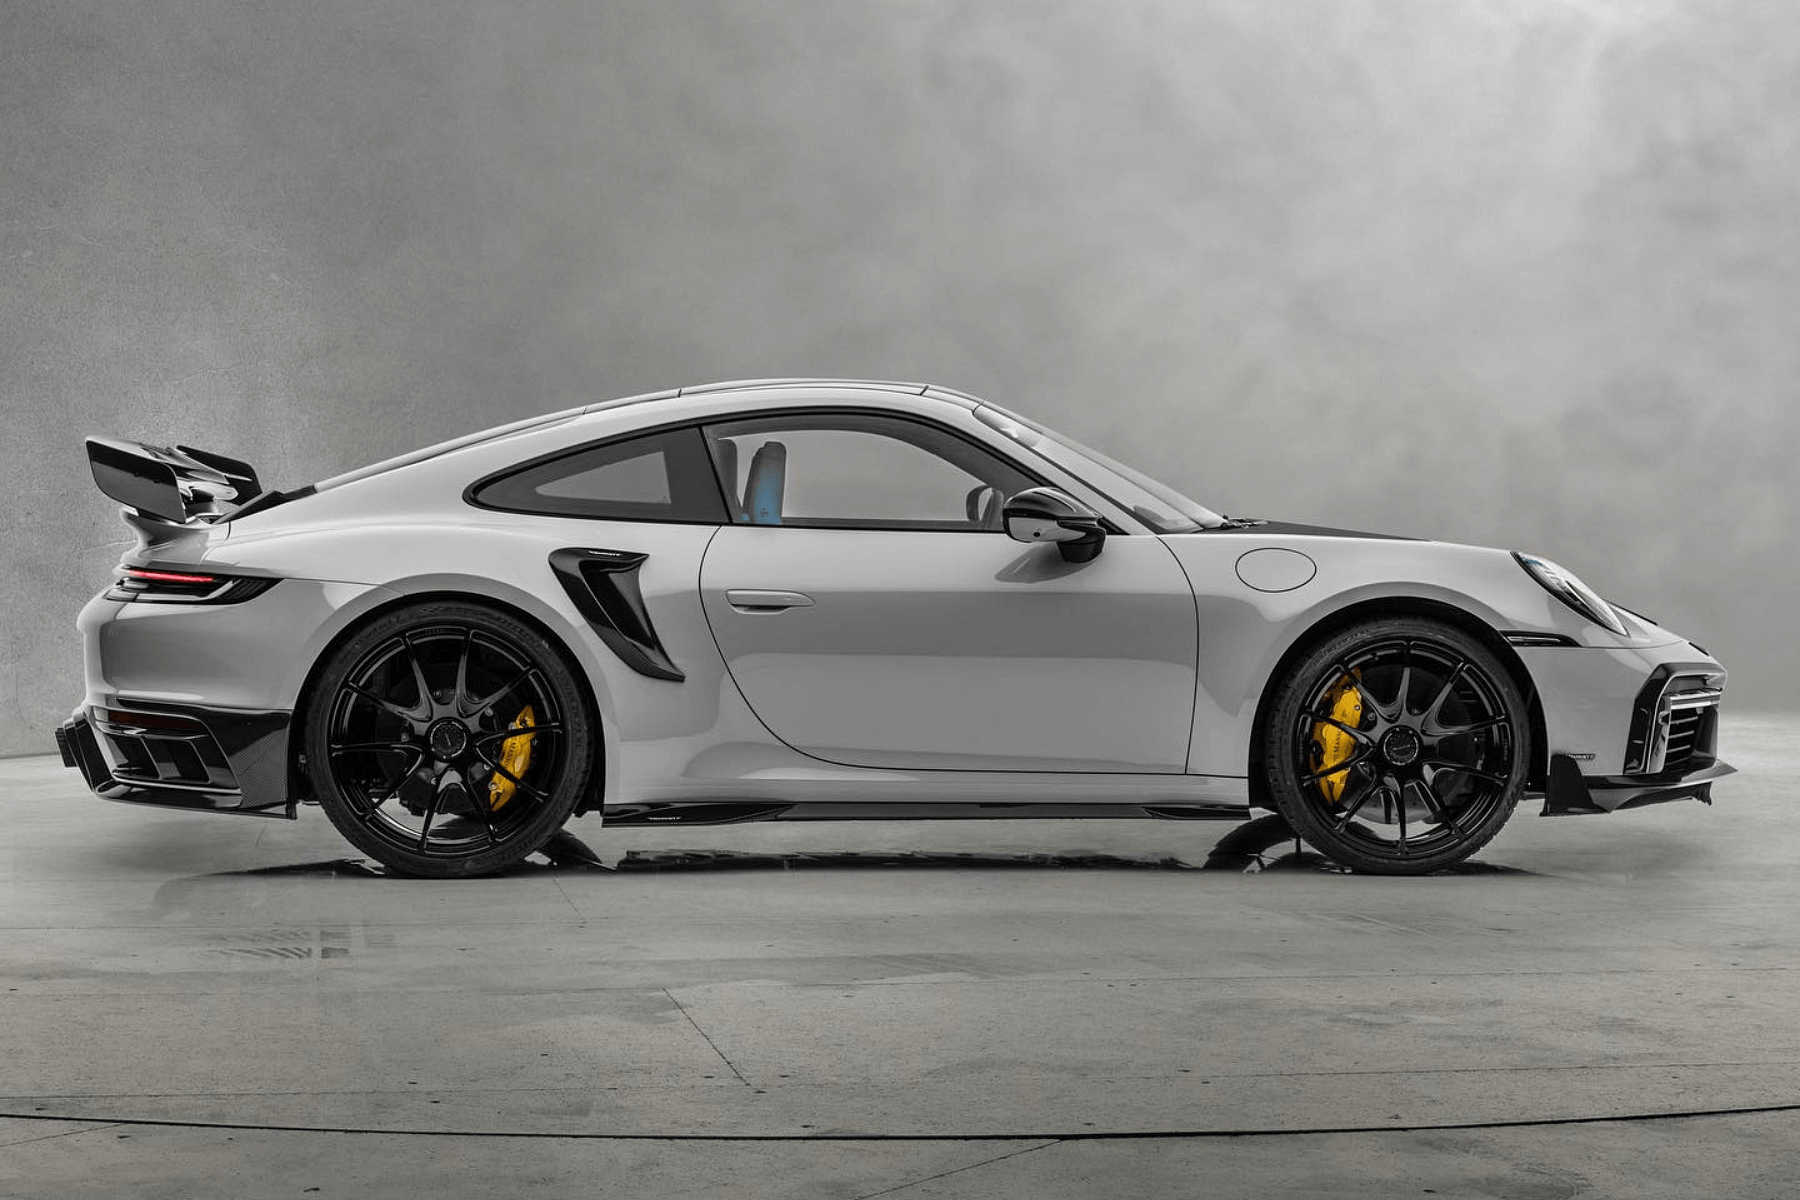 Porsche 911 Turbo S Gets 900-HP Upgrade And New Looks Thanks To Mansory